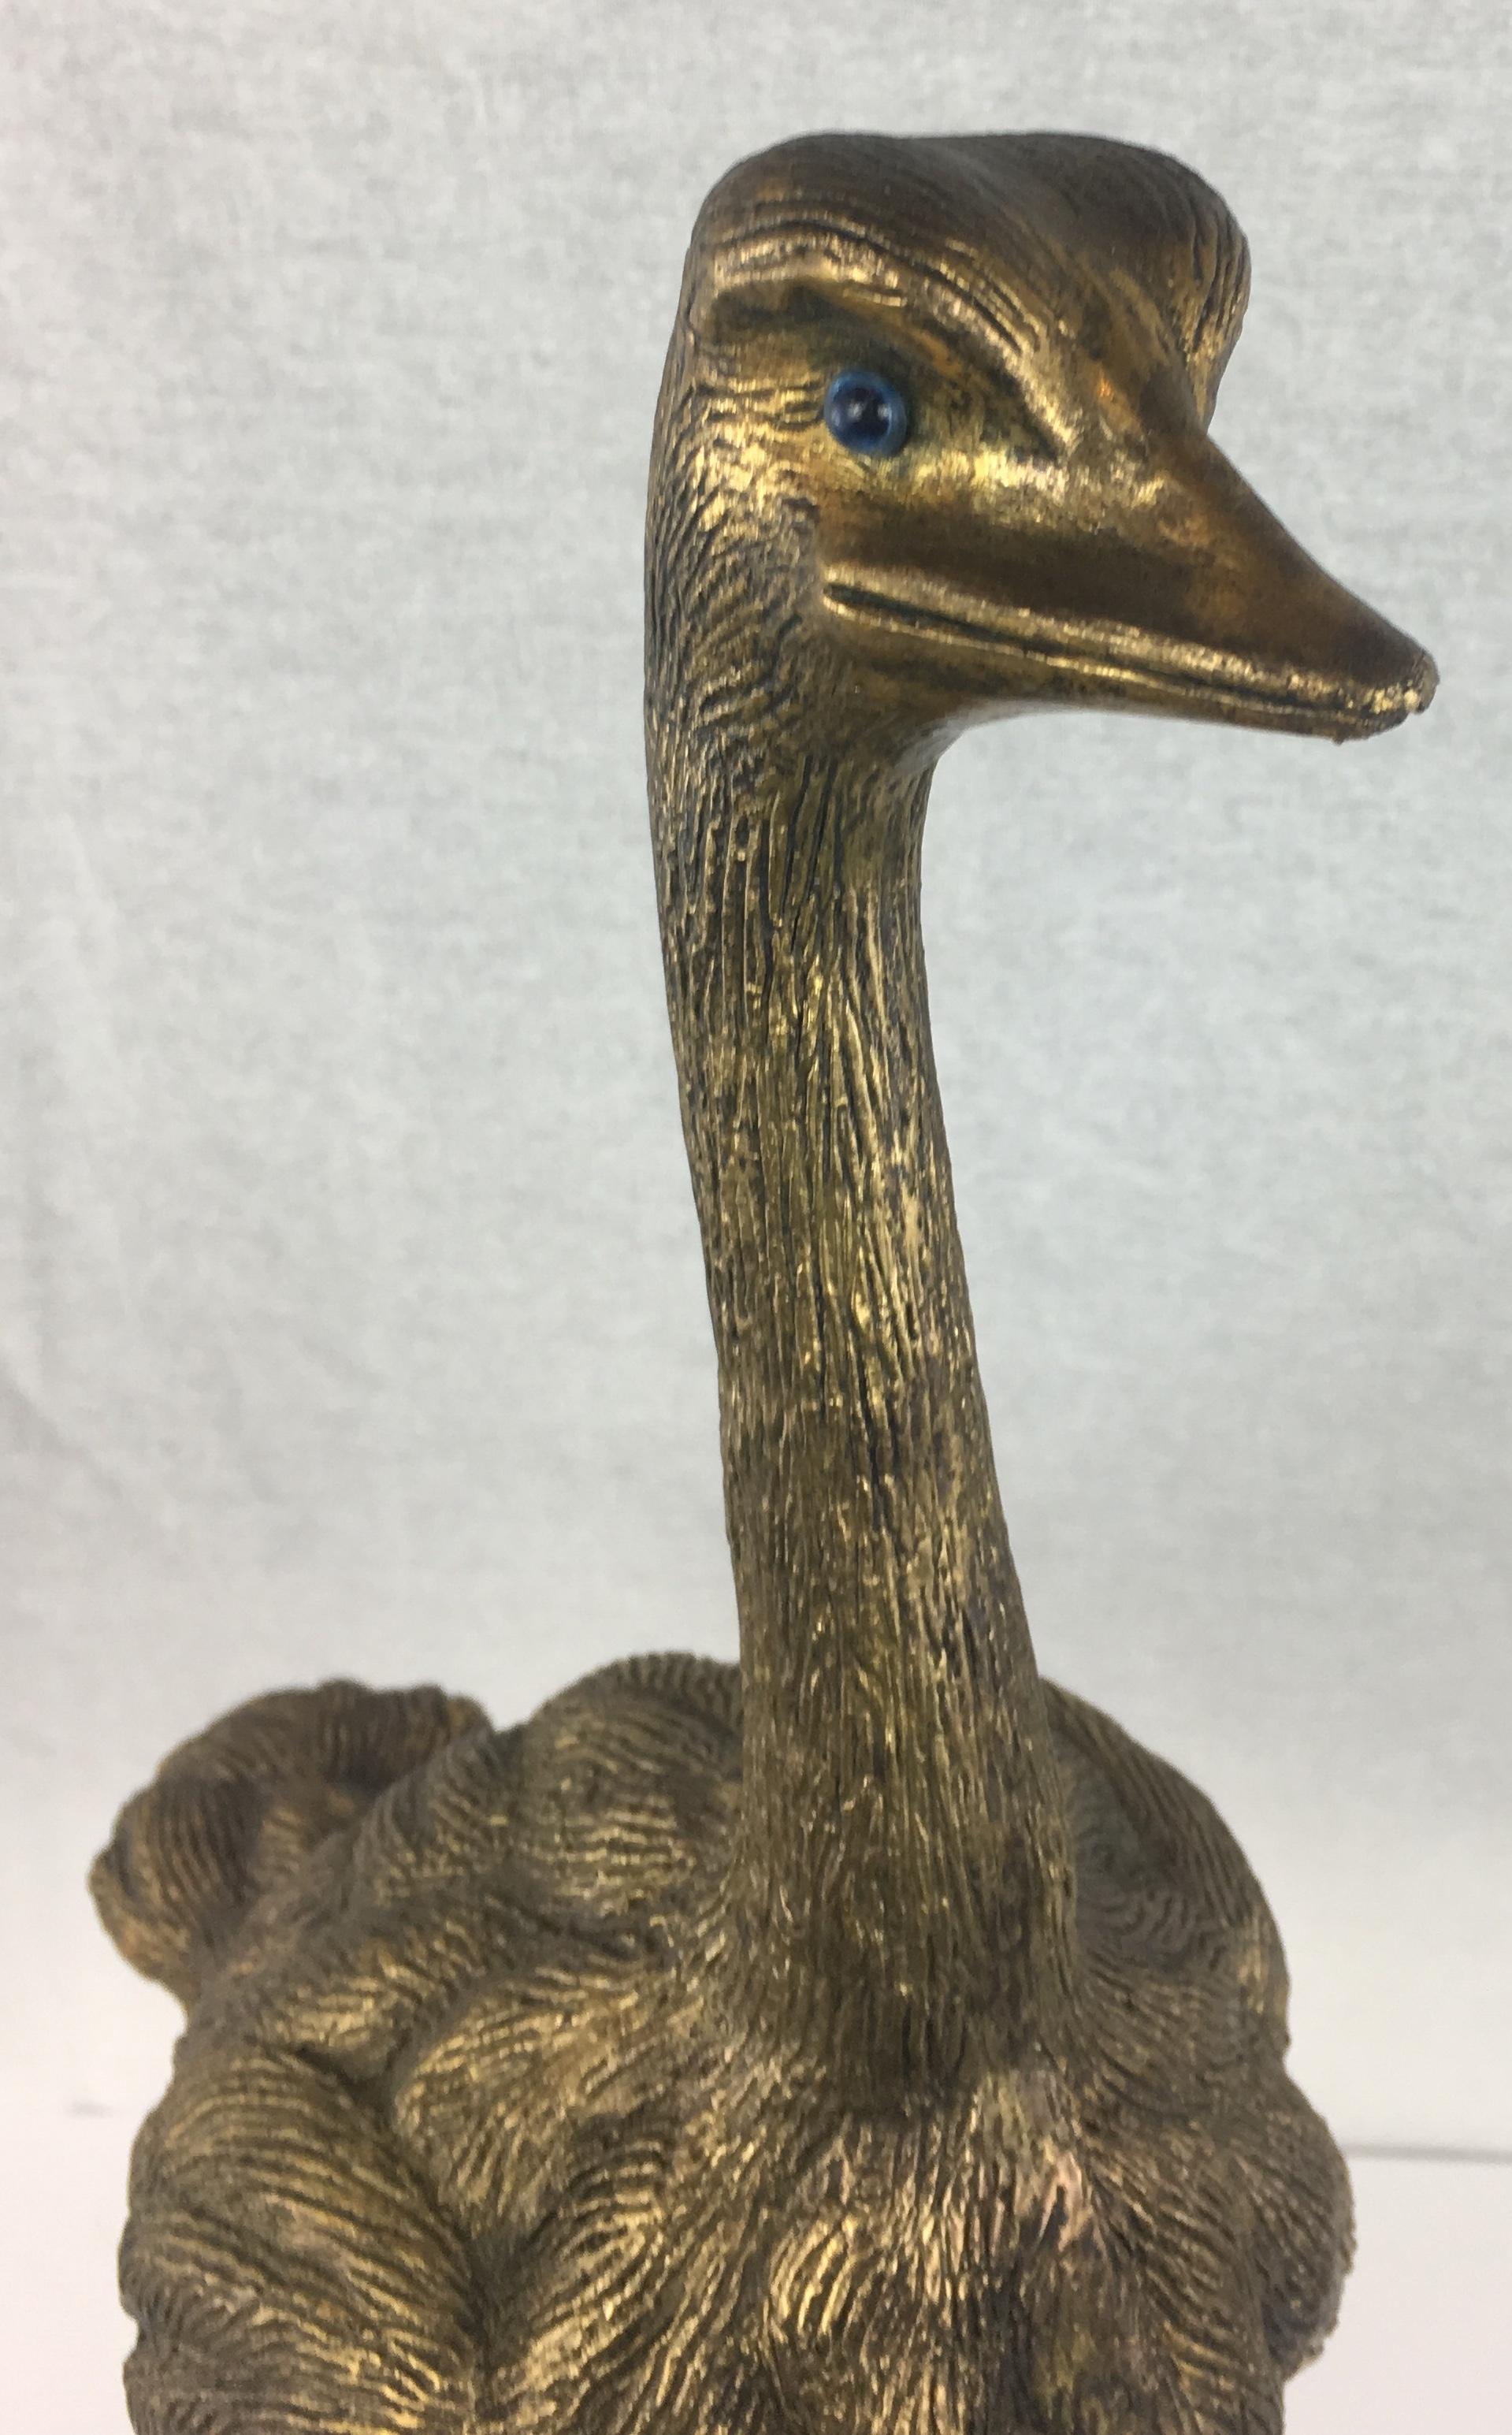 Unique Midcentury Ostrich Sculpture by Anthony Redmile and Gabriella Binazzi 1